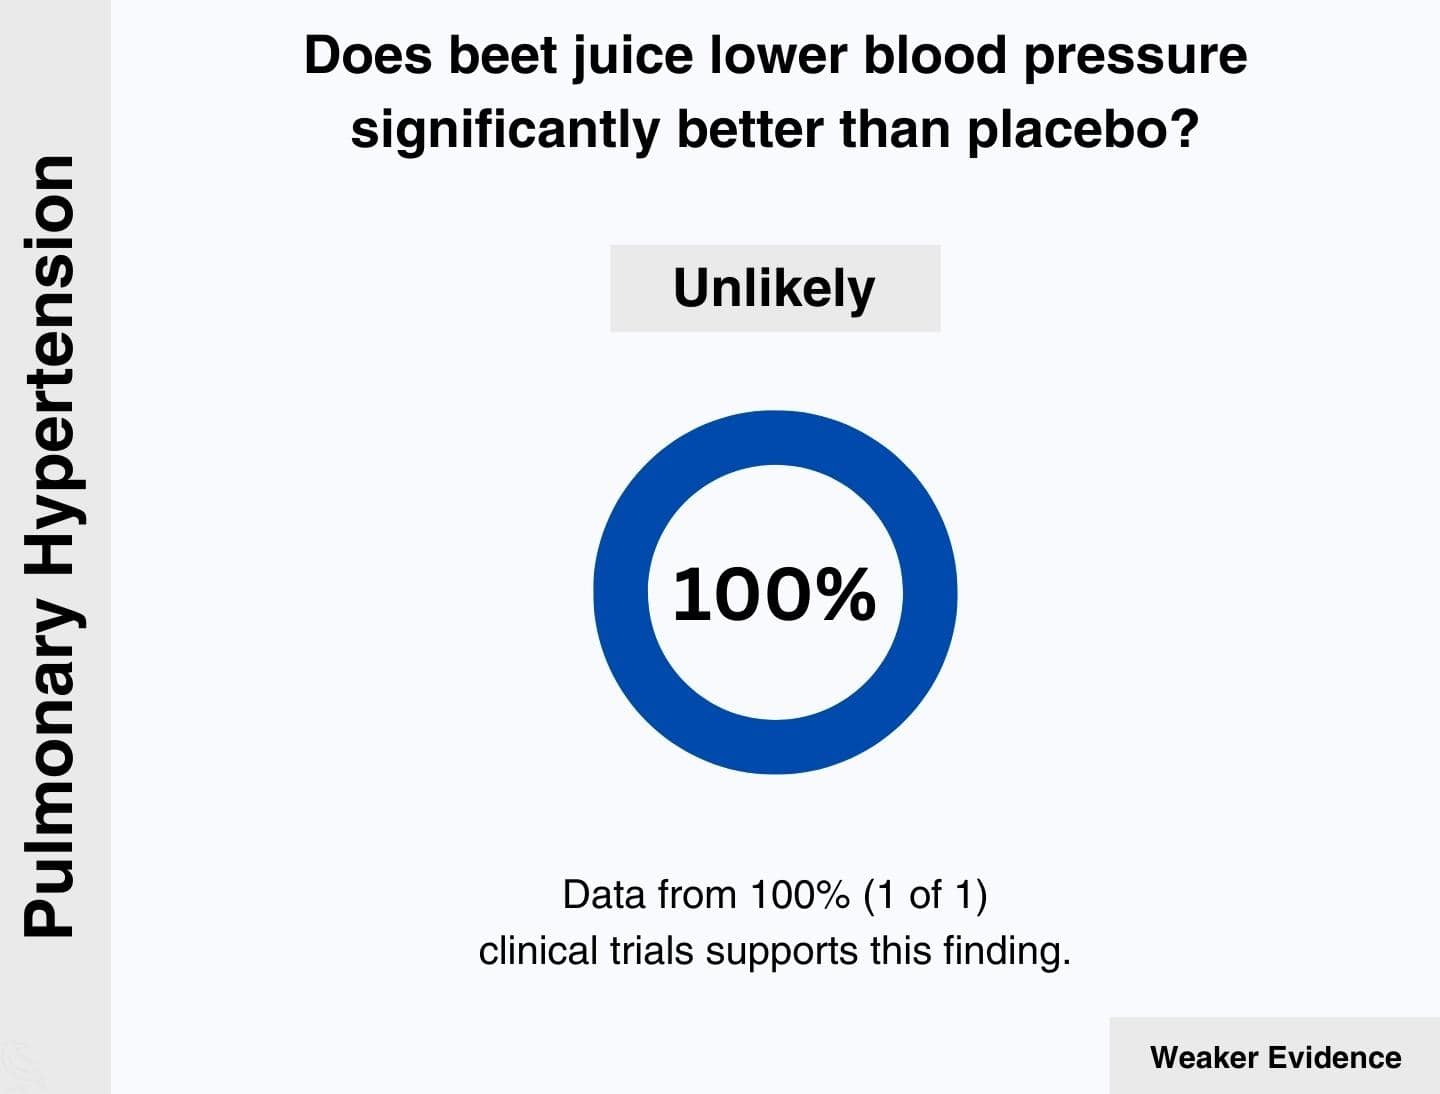 Pulmonary arterial hypertension: 100% of relevant clinical trials agree that beet juice is unlikely to lower blood pressure significantly better than placebo.